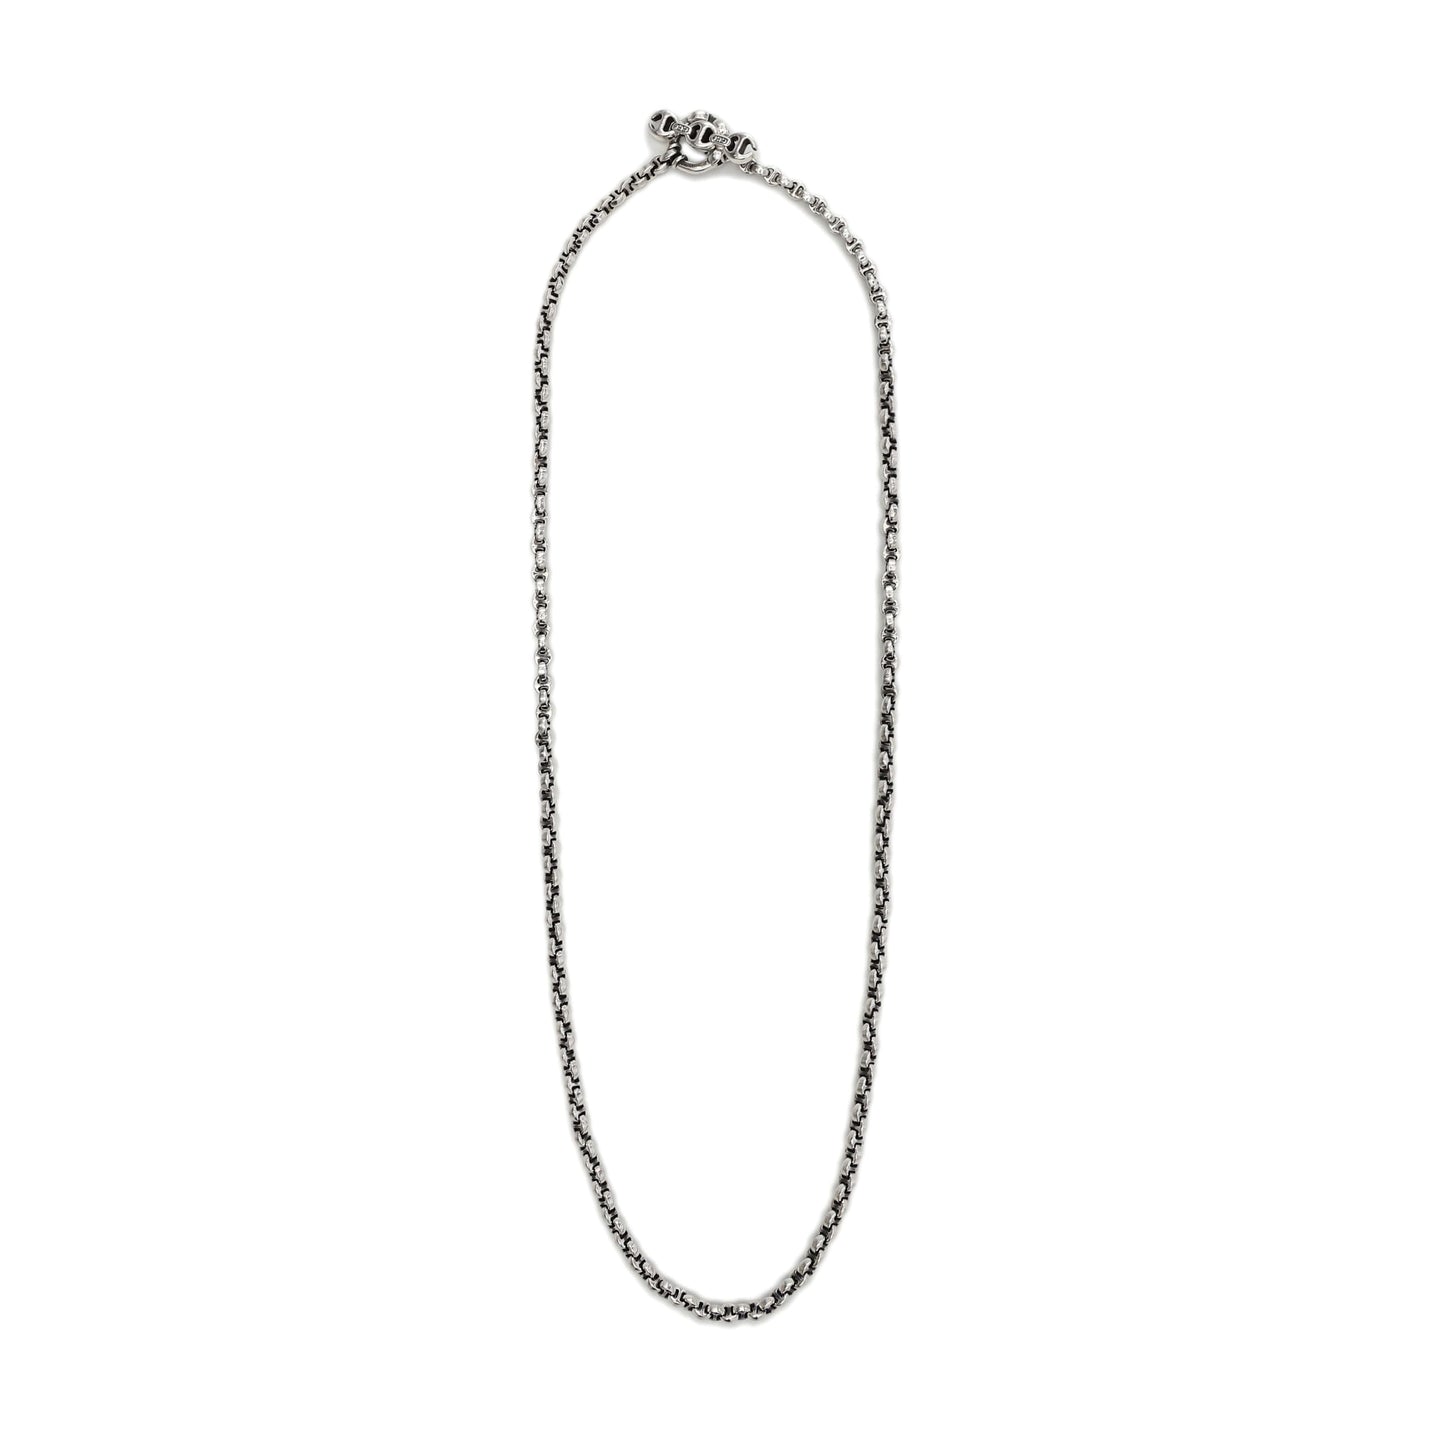 20inc MICRO OPEN-LINK NECKLACE  HB040